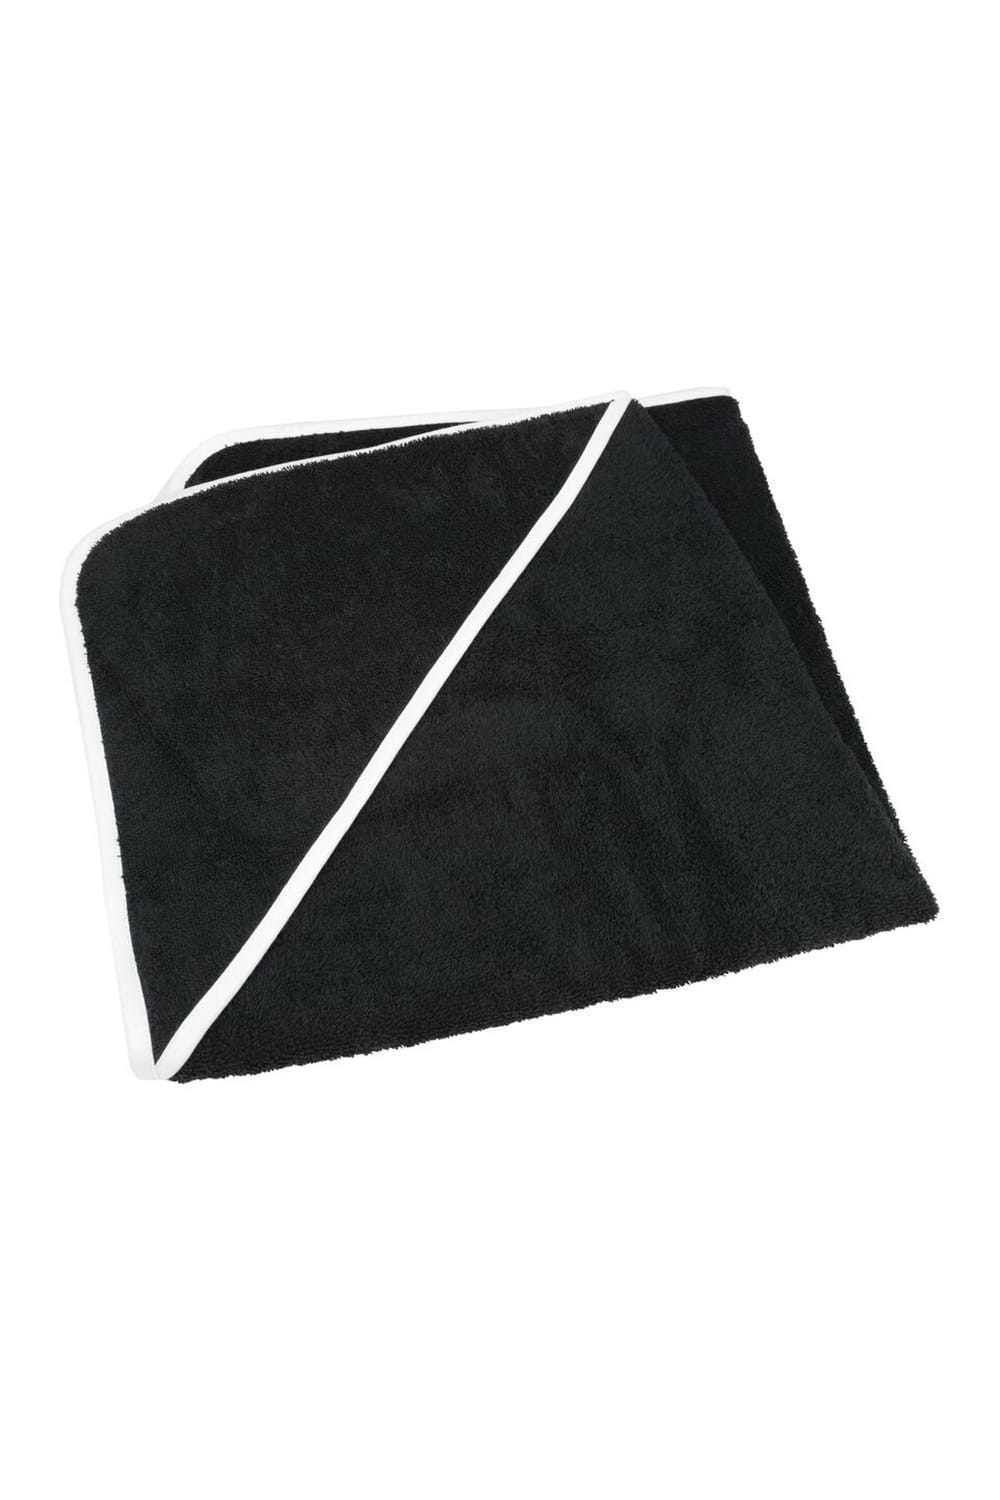 A&R Towels Baby/Toddler Babiezz Medium Hooded Towel (Black/White) (One Size)